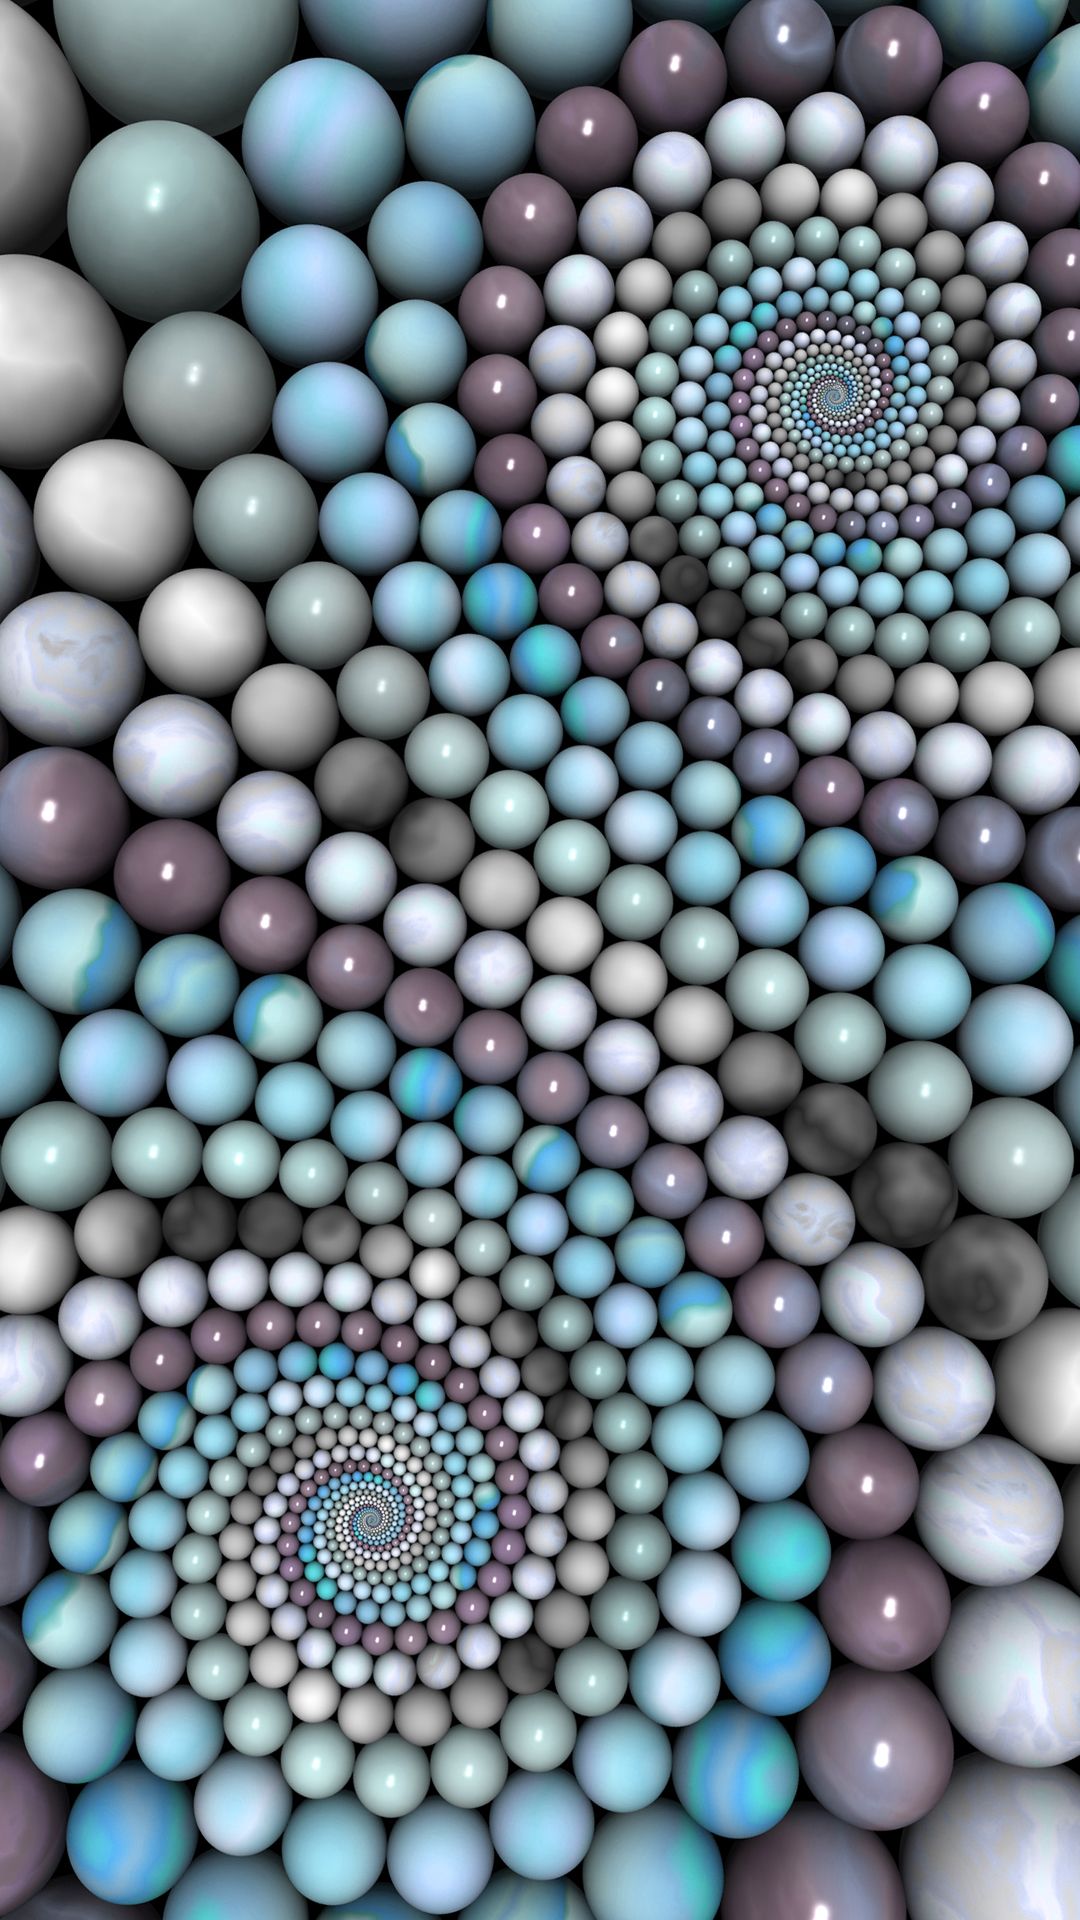 Marble Balls iPhone Wallpaper On